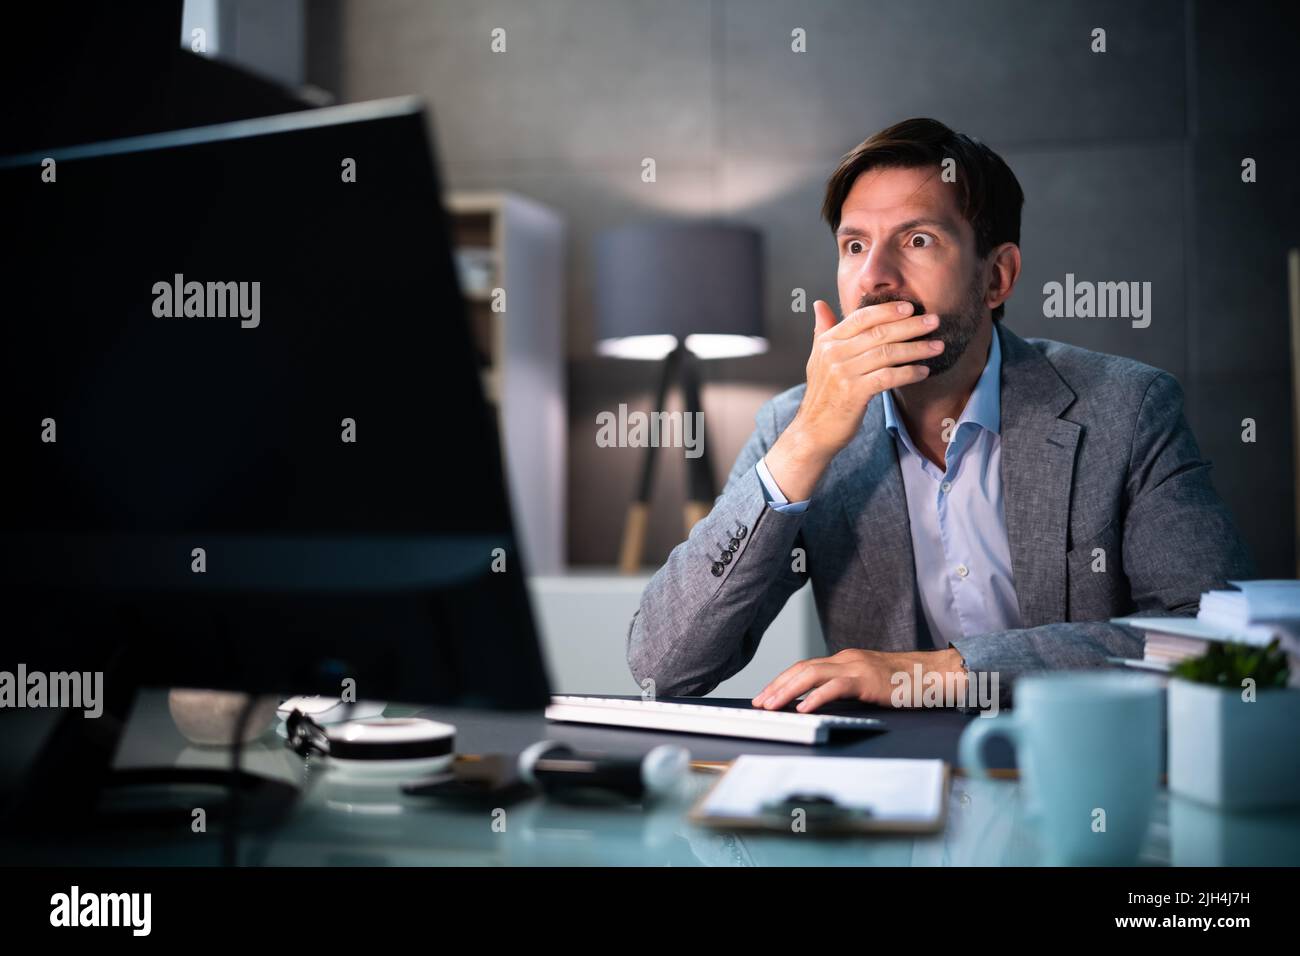 Business Person Confusion. Corporate Businessman Clerk Using Computer Stock Photo